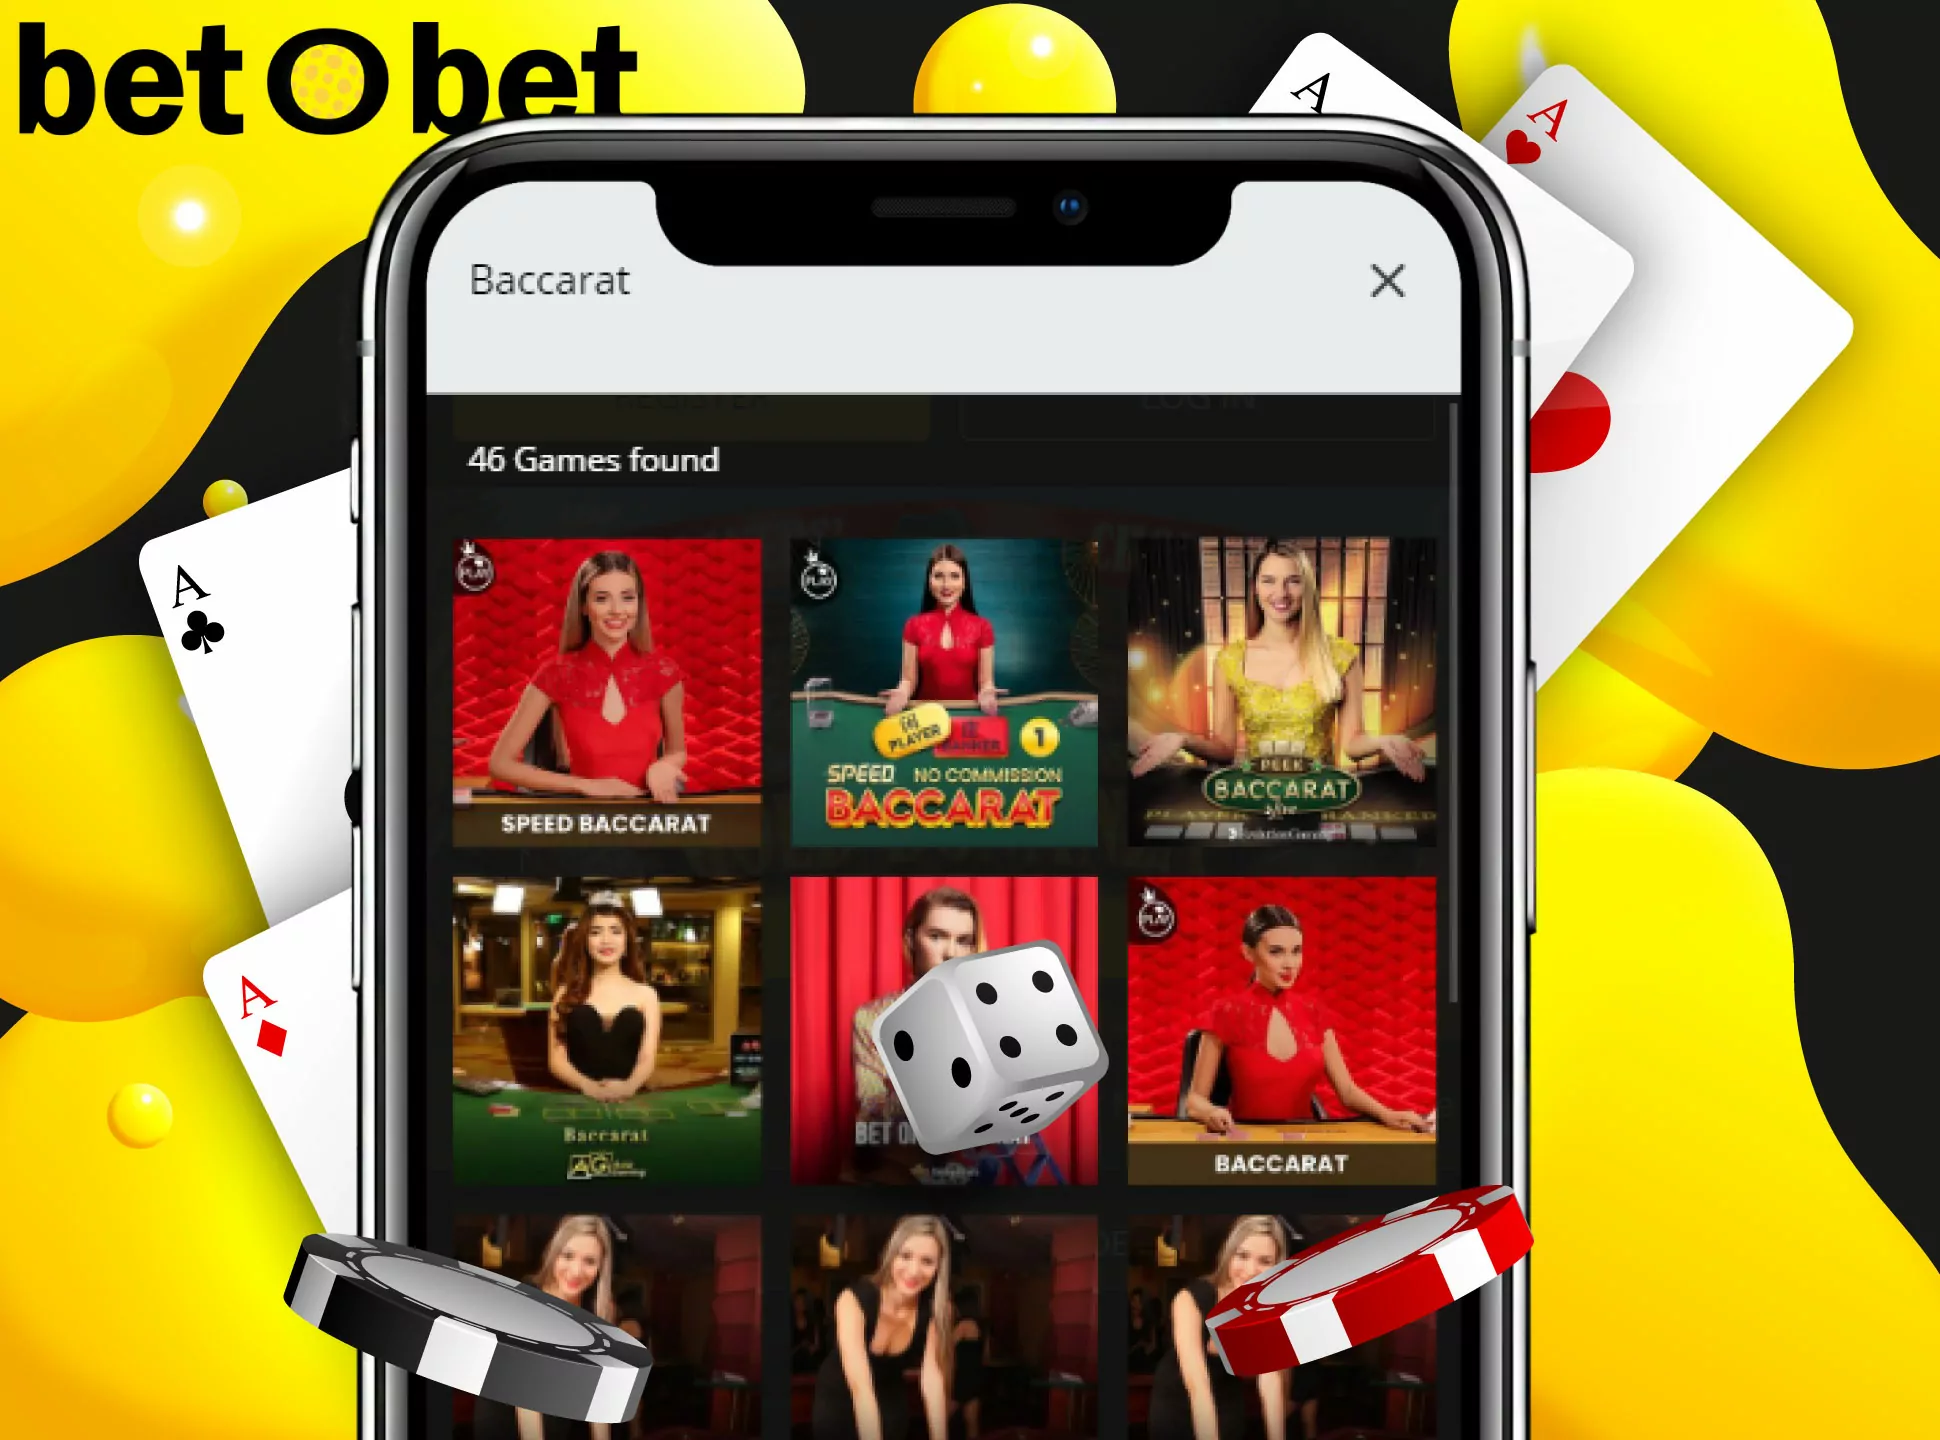 You can also play baccarat in the live mode at Betobet.